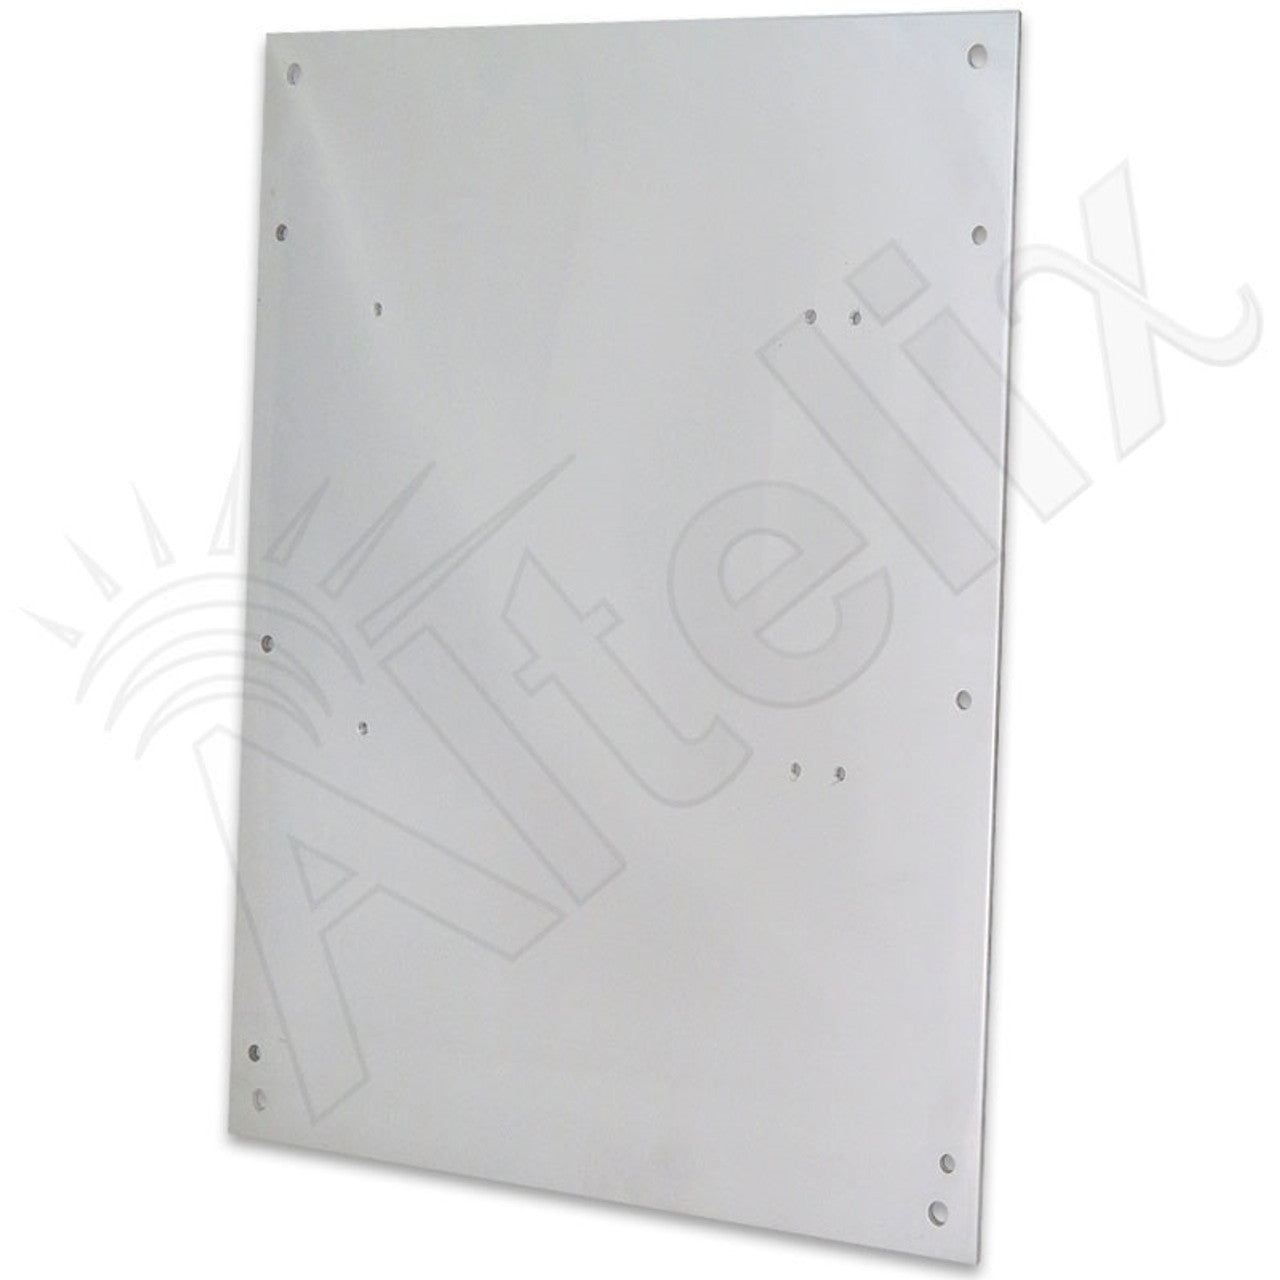 Altelix Blank Aluminum Equipment Mounting Plate for NF141206, NF141208 & NF141210 Series Enclosures